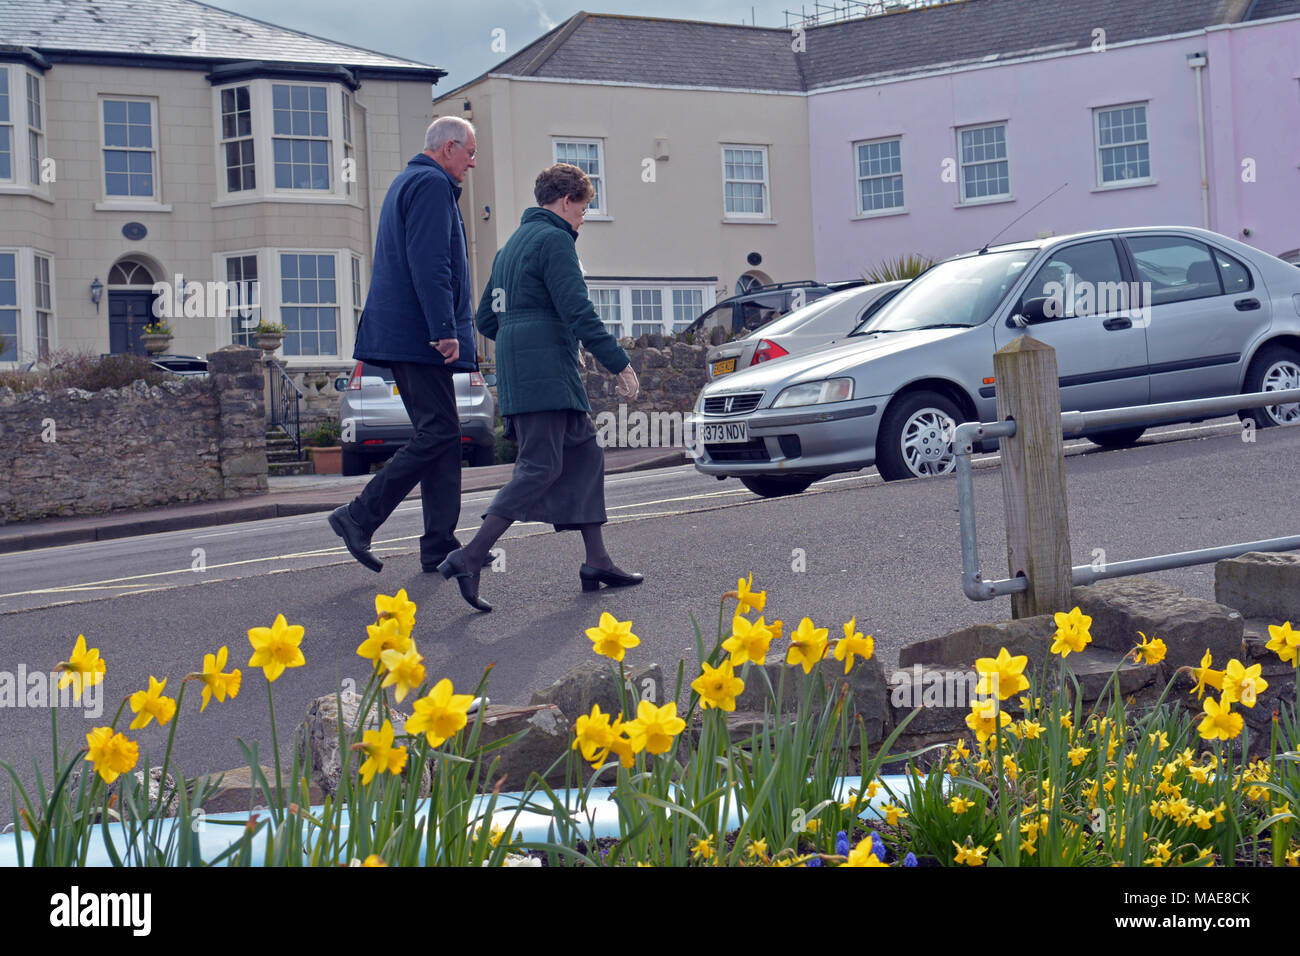 UK Weather. Easter Sunday morning at Clevedon Sea front. Robert Timoney/Alamy/Live/news Credit: Robert Timoney/Alamy Live News Stock Photo